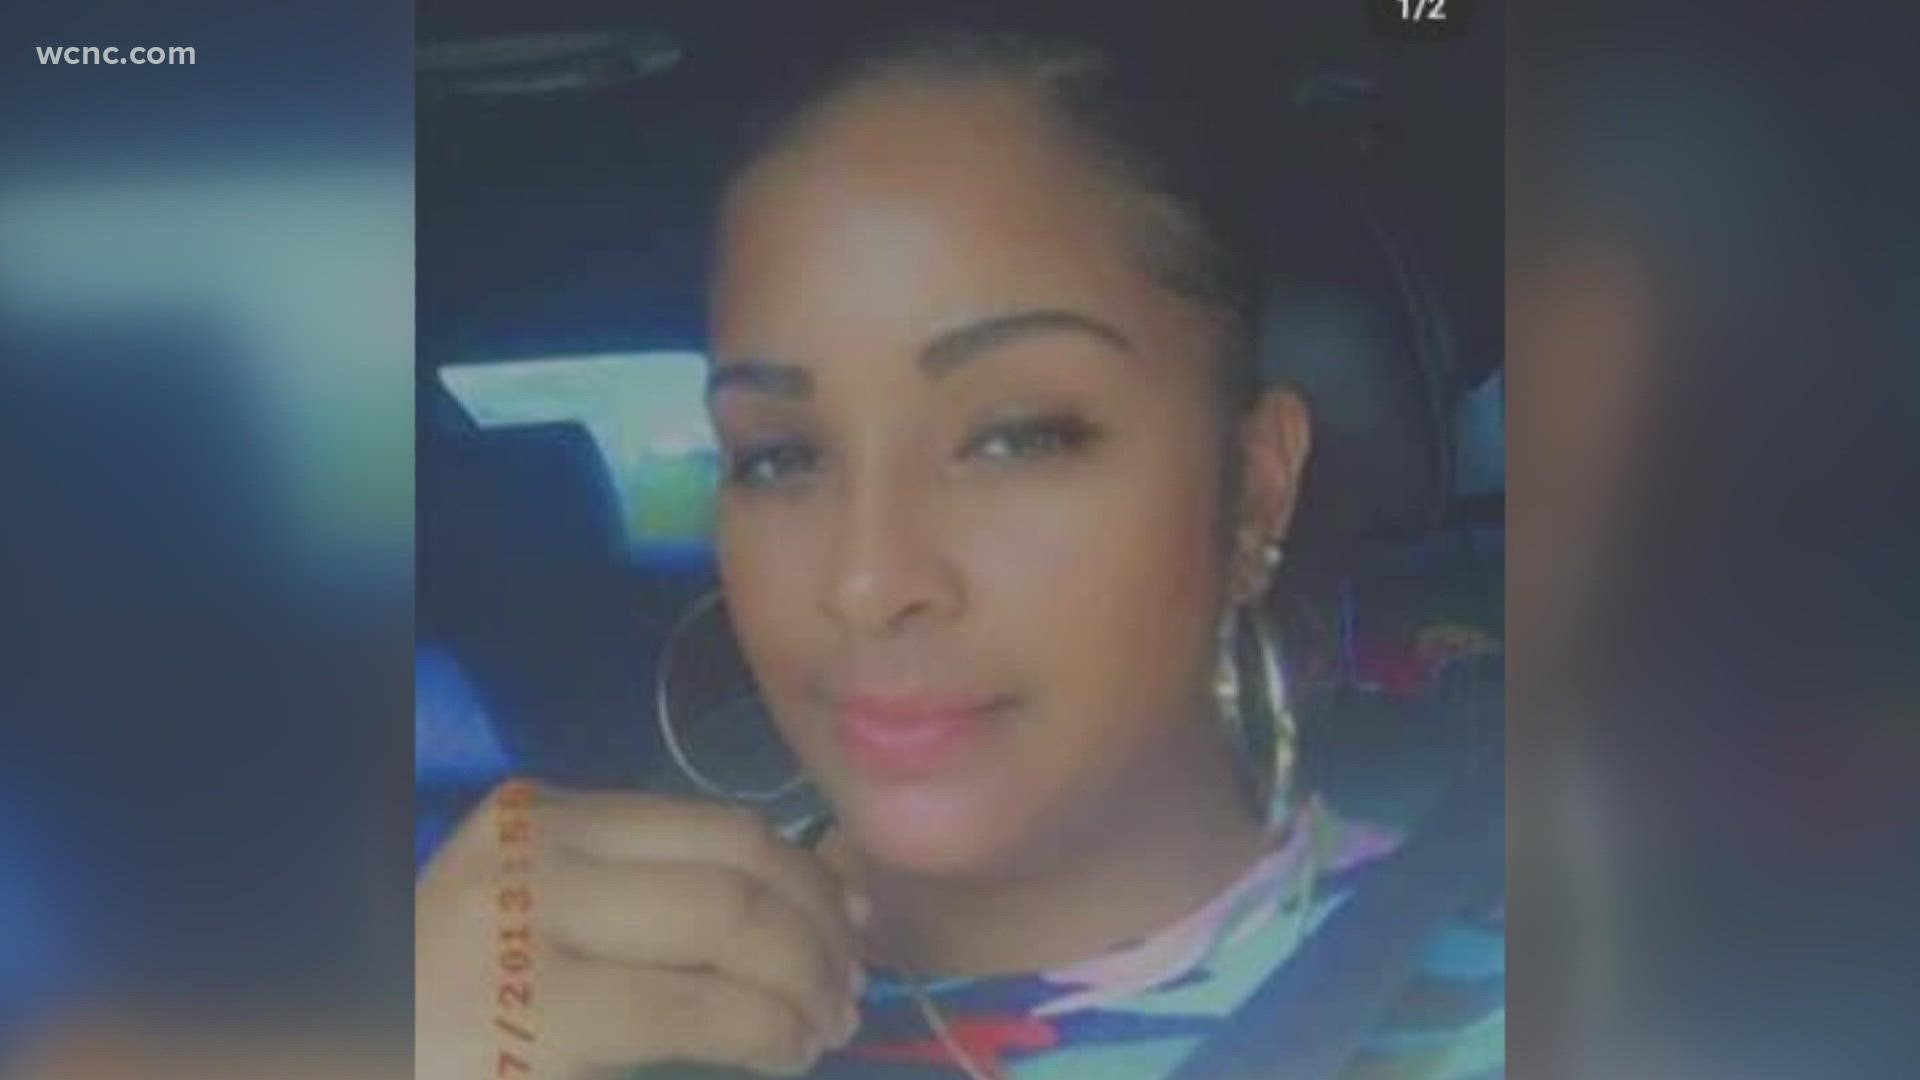 Deidre Reid was last seen on Sept. 3. She was taking Emanuel Bedford, the father of her son, to a bus station in Charlotte. Her family hasn't heard from her since.